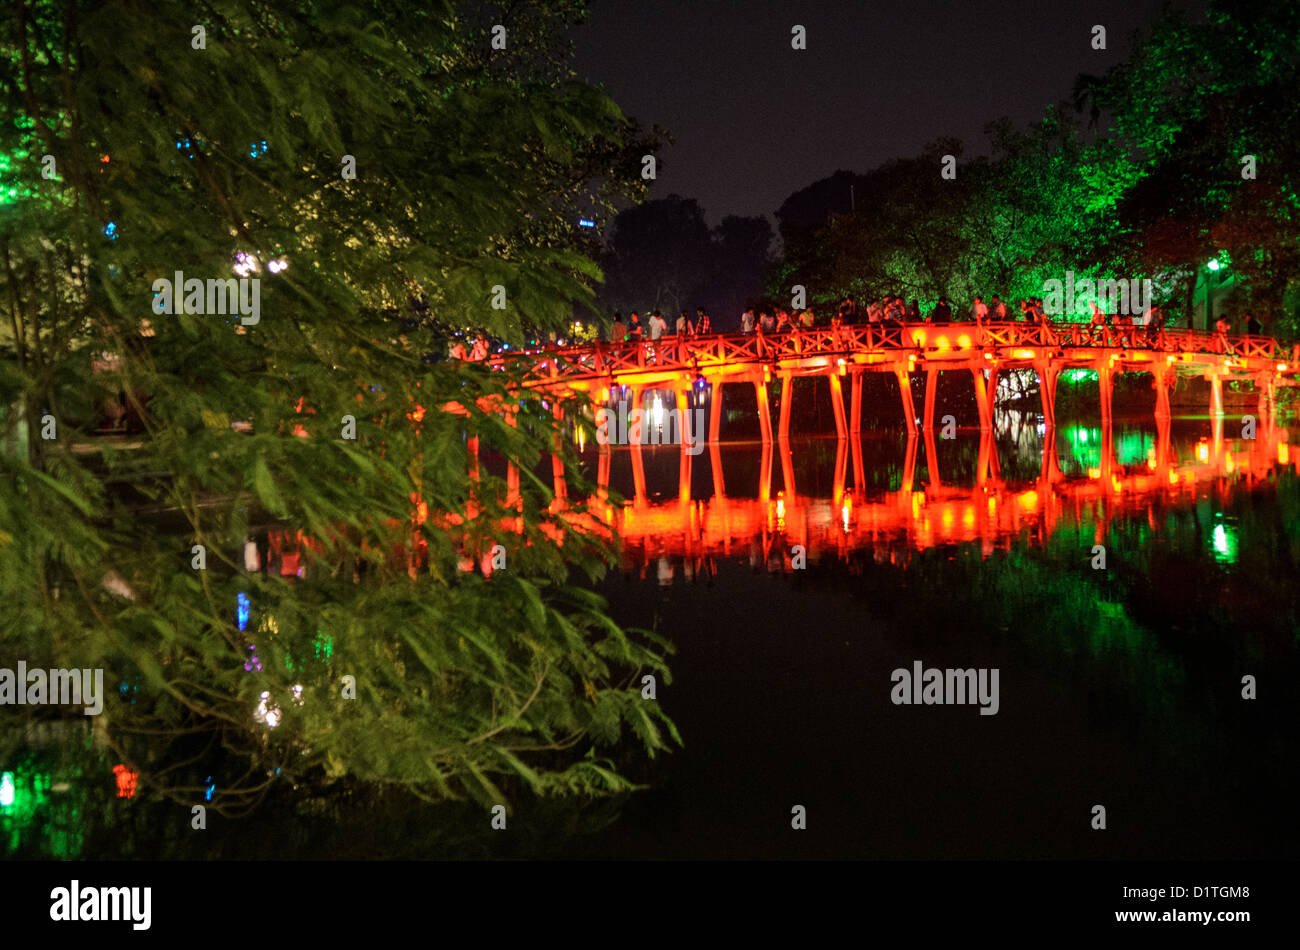 HANOI, Vietnam - Many tourists visit the The Huc Bridge (Morning Sunlight Bridge) at night. The red-painted, wooden bridge joins the northern shore of the lake with Jade Island and the Temple of the Jade Mountain (Ngoc Son Temple). Stock Photo